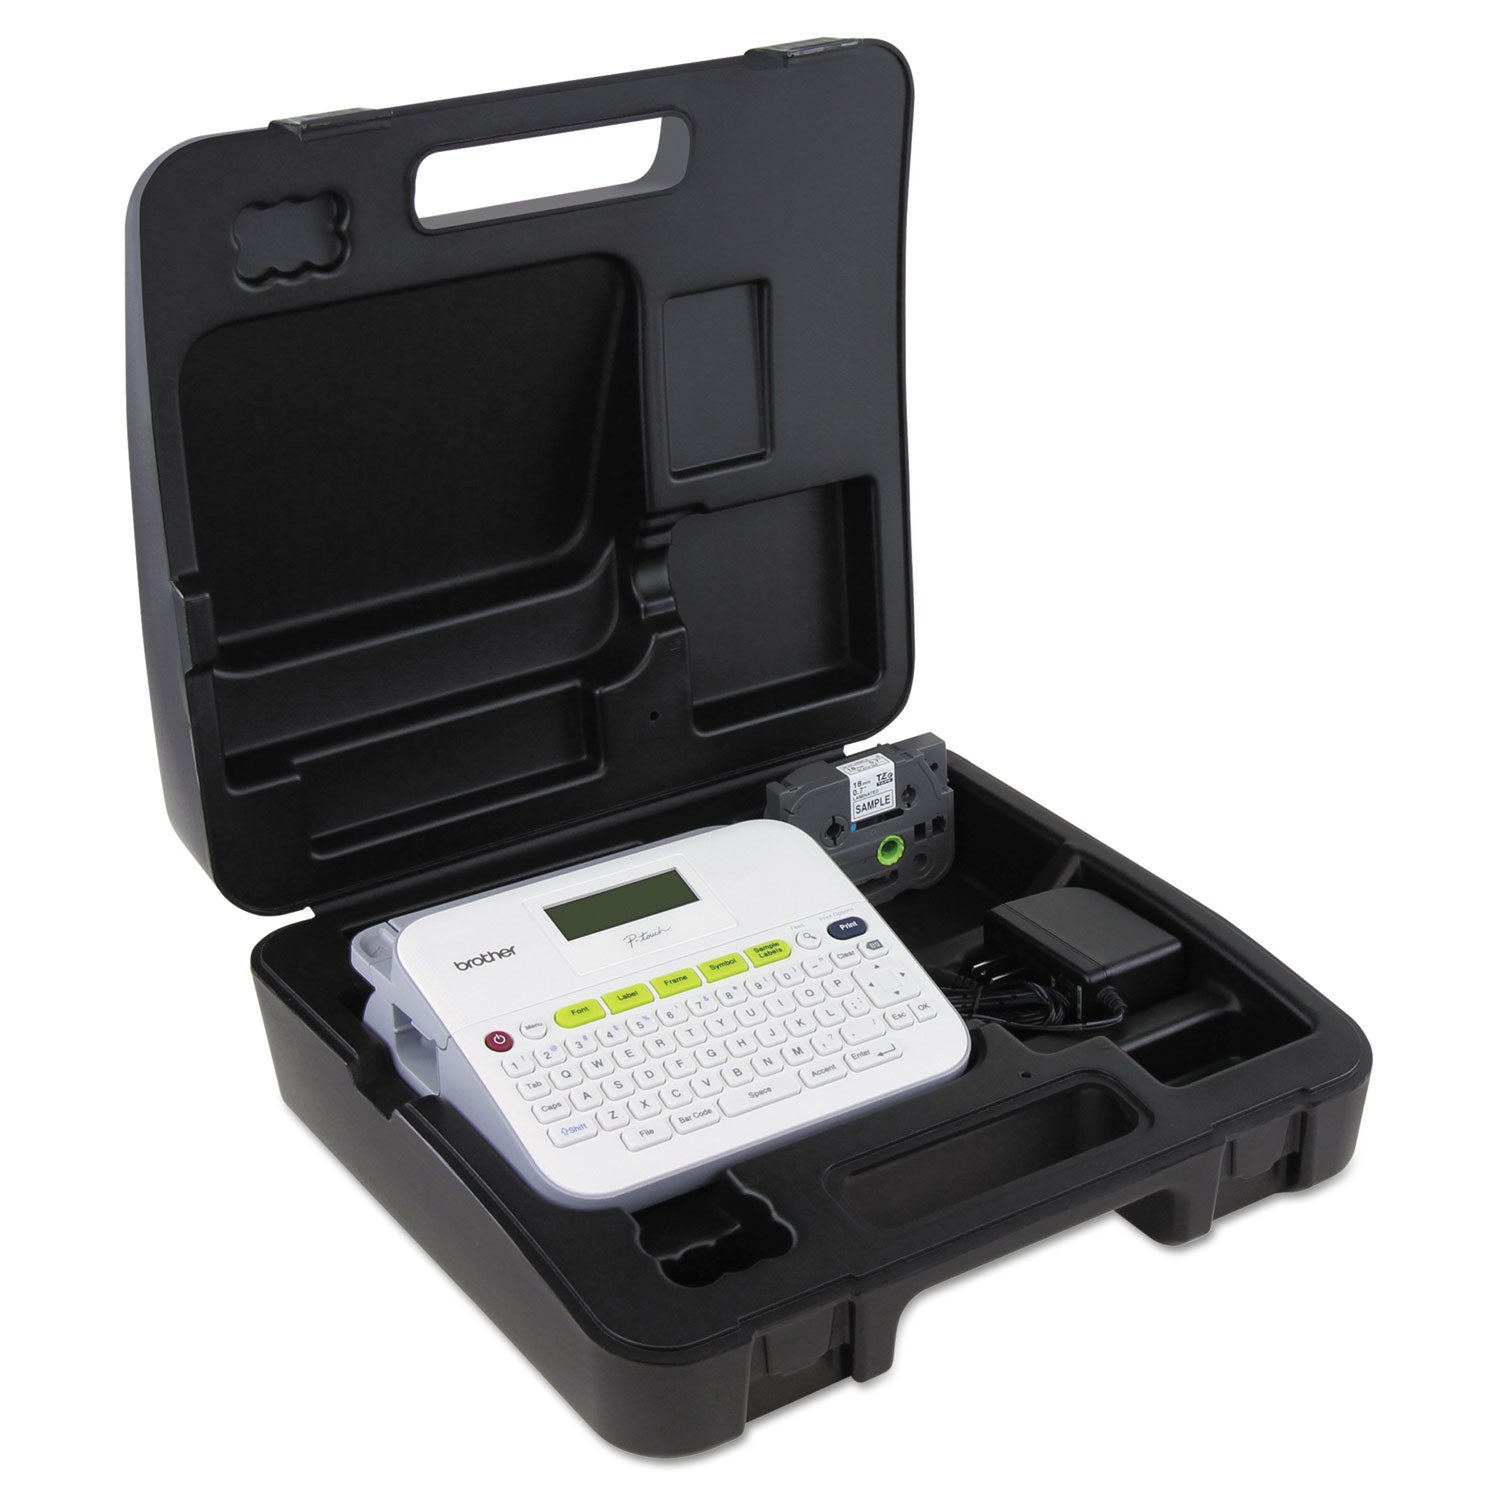  Brother P-Touch PTD400VP PTD400VP Versatile, Easy-to-Use Label Maker with Carry Case and Adapter, 7.5w x 7d x 2.88h (BRTPTD400VP) 